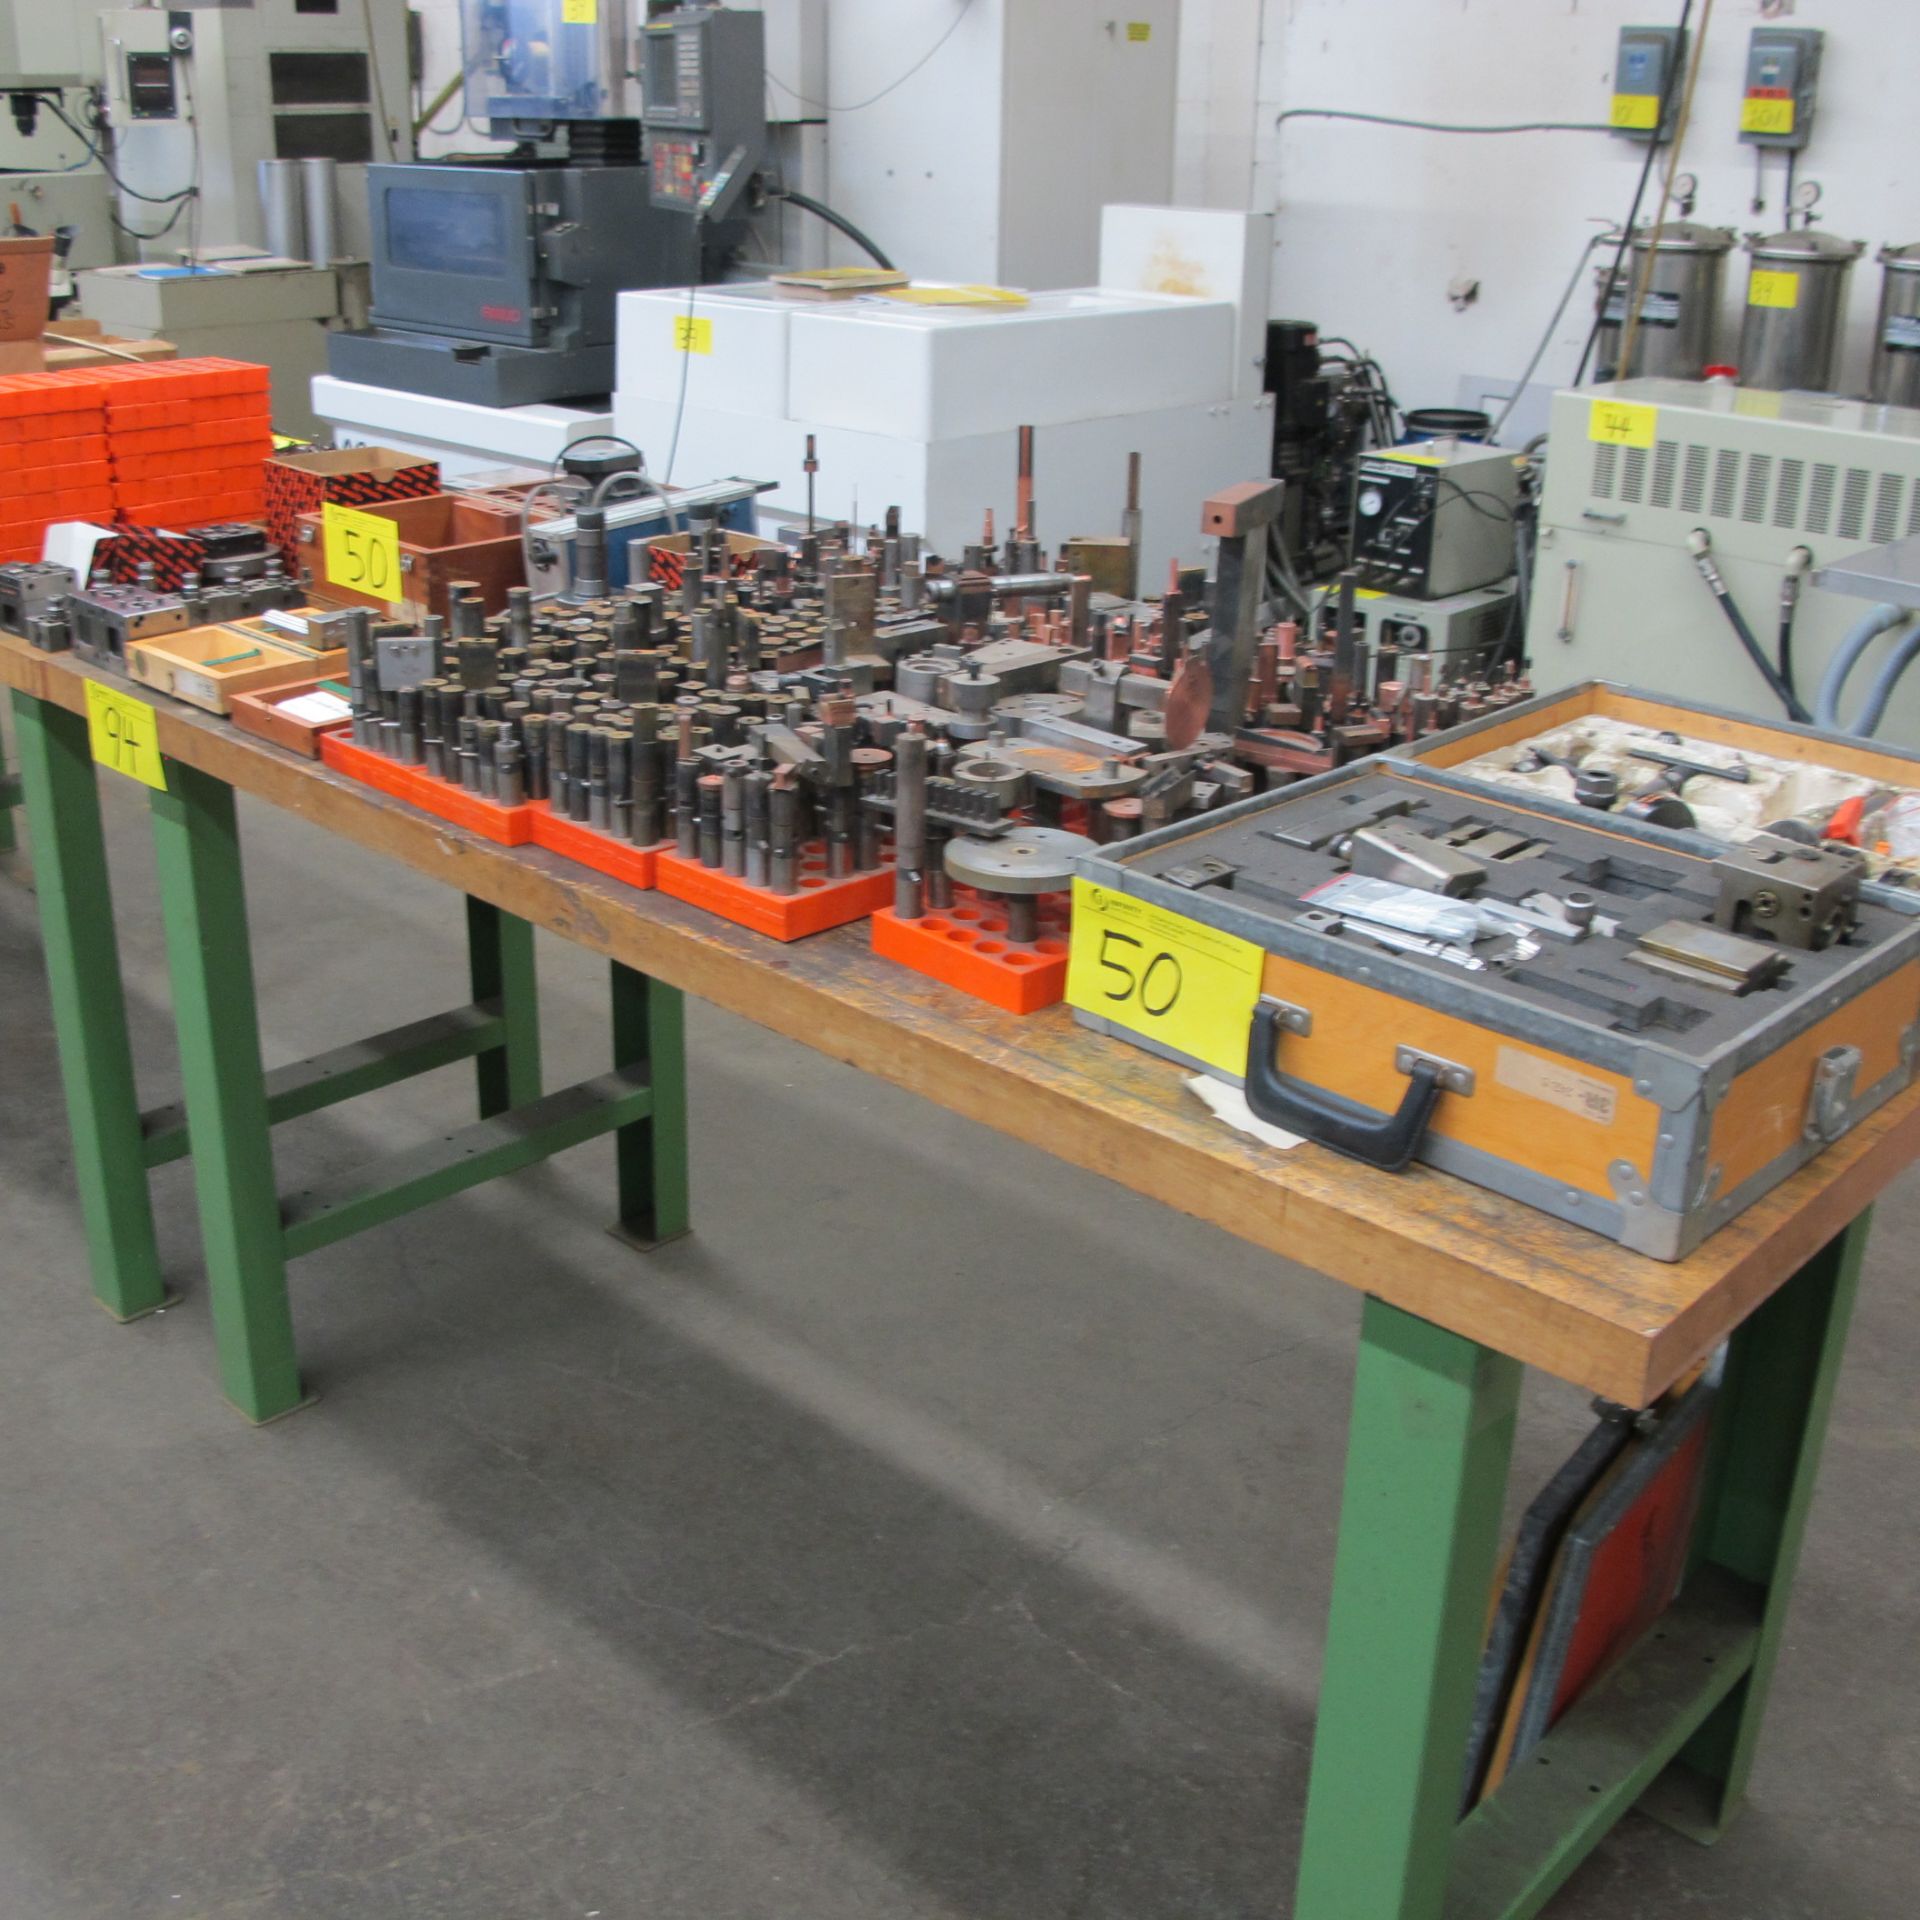 LOT OF SYSTEM R3 EDM BLOCKS, TRAYS, SPINDLES, SPEED CONTROLLER AND ELECTRODES - Image 2 of 6